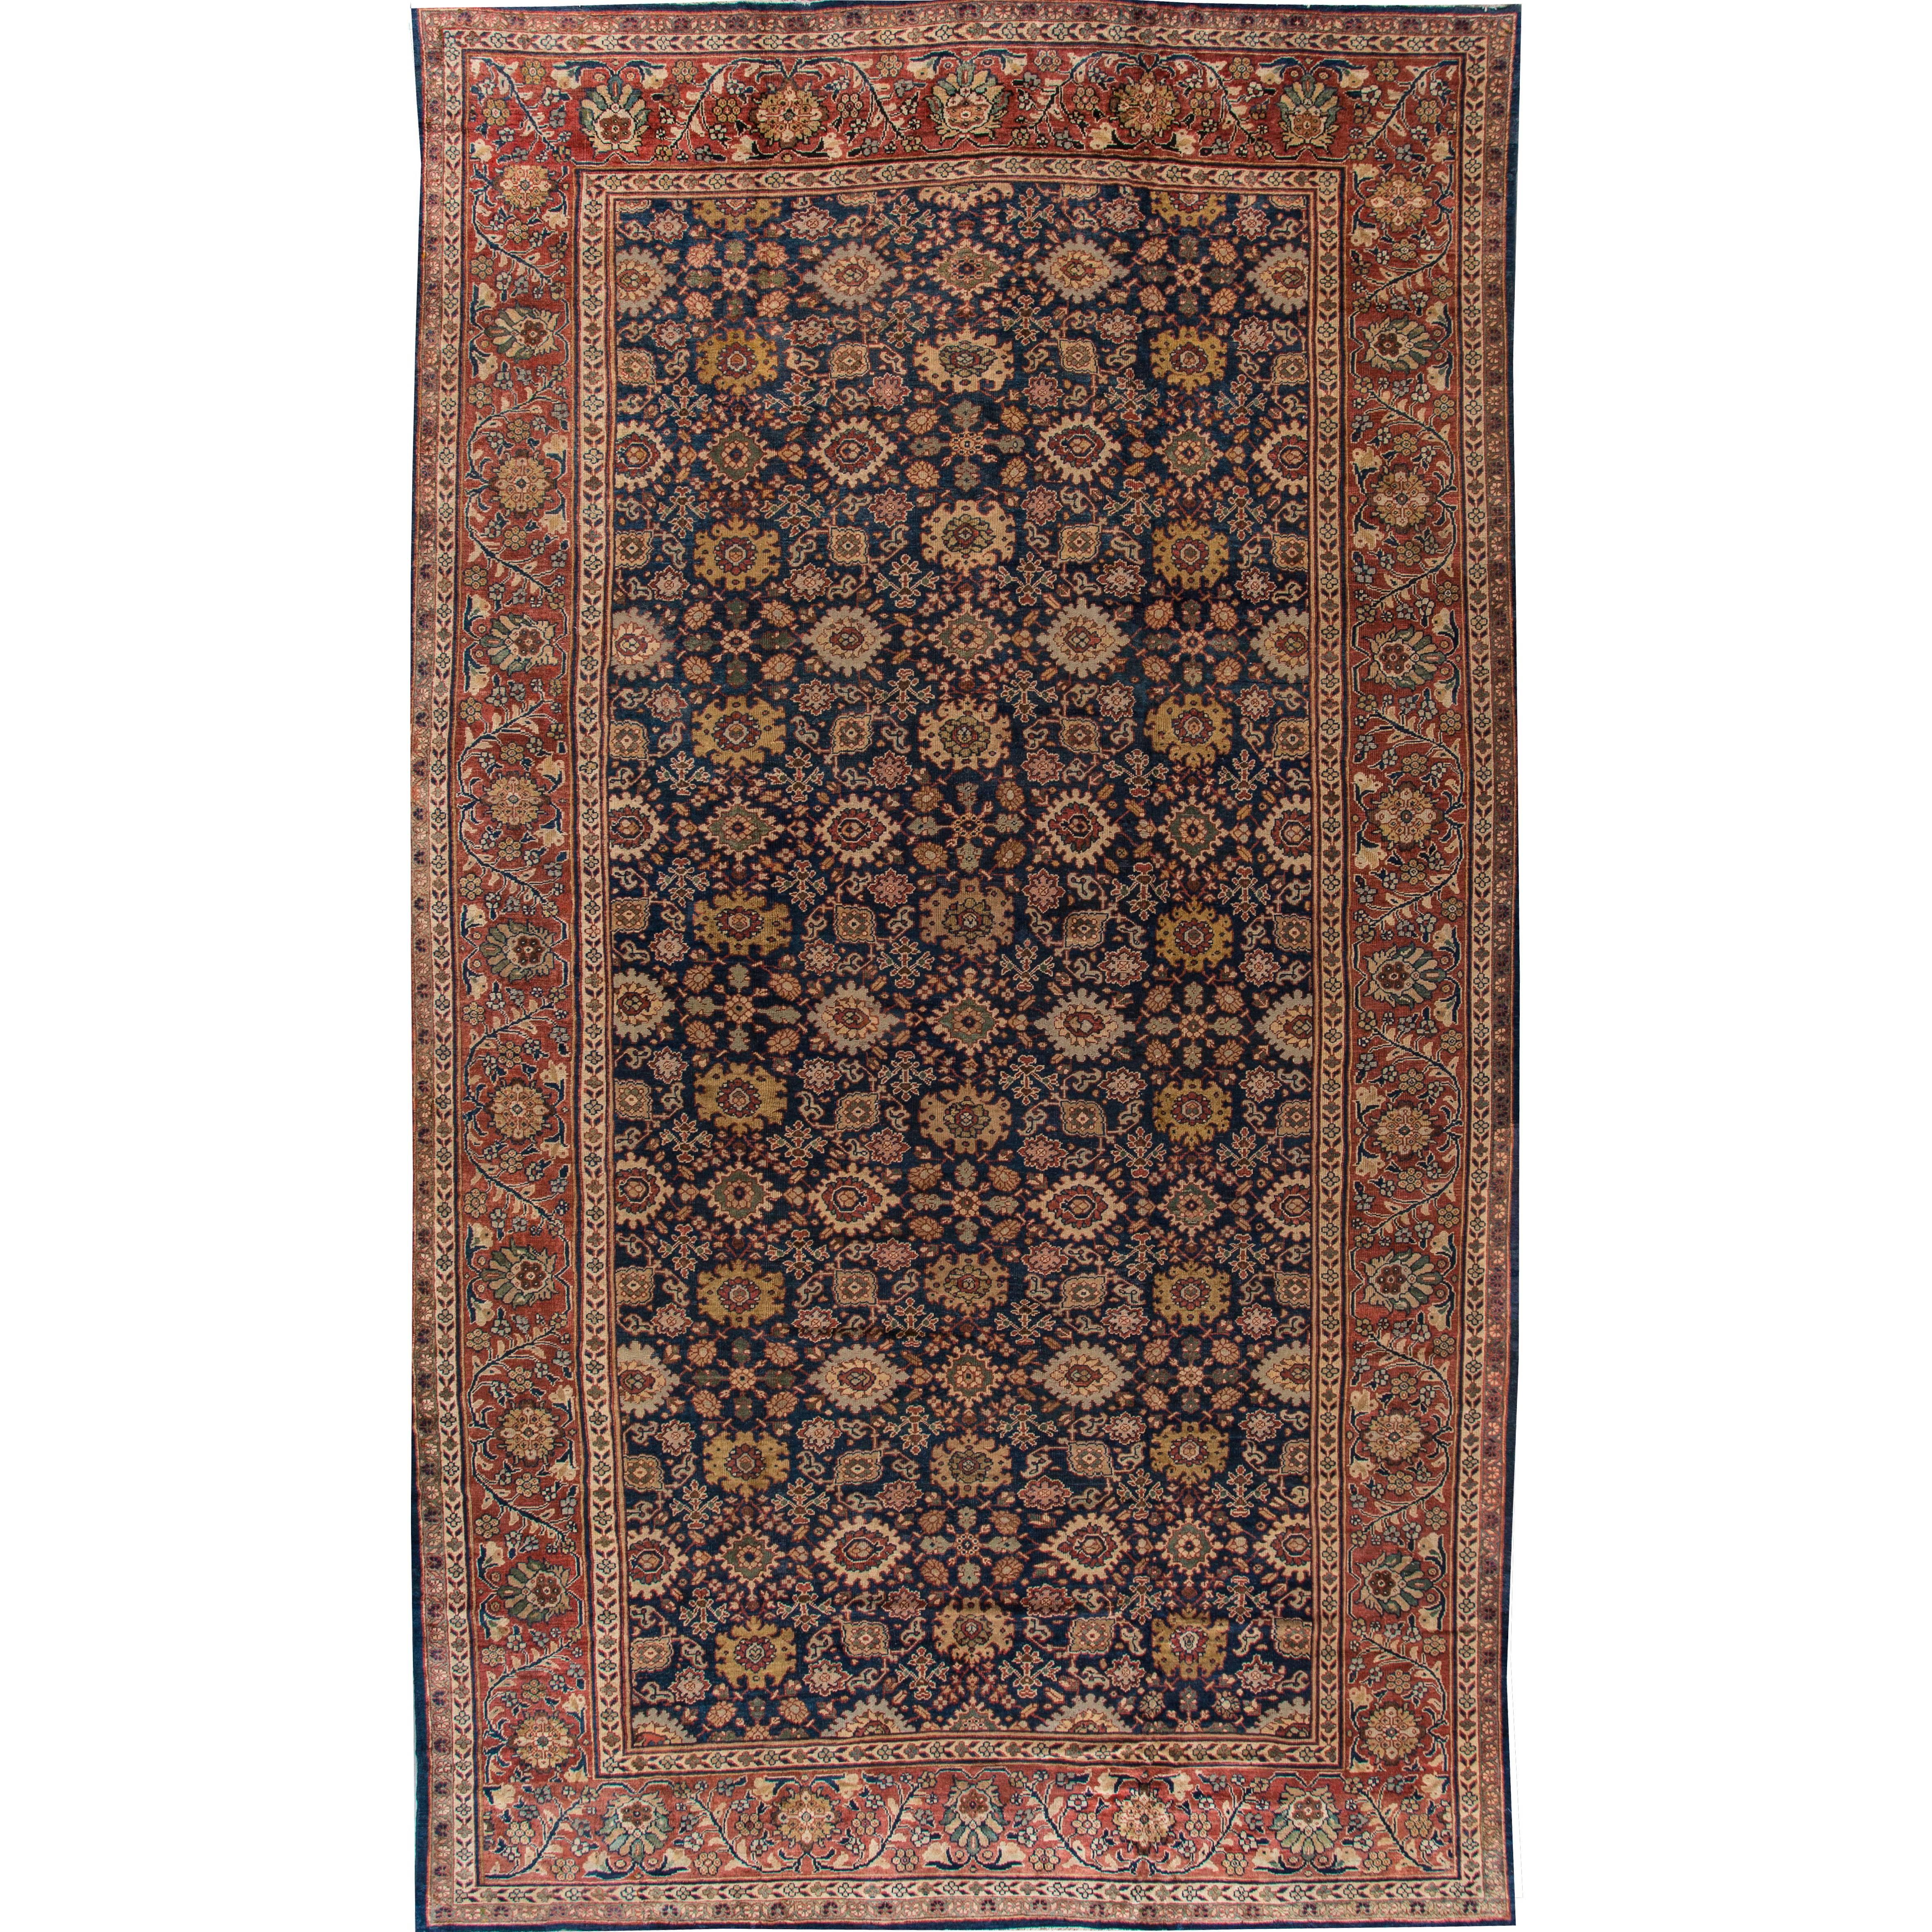 Simply Beautiful Antique Sultanabad Rug